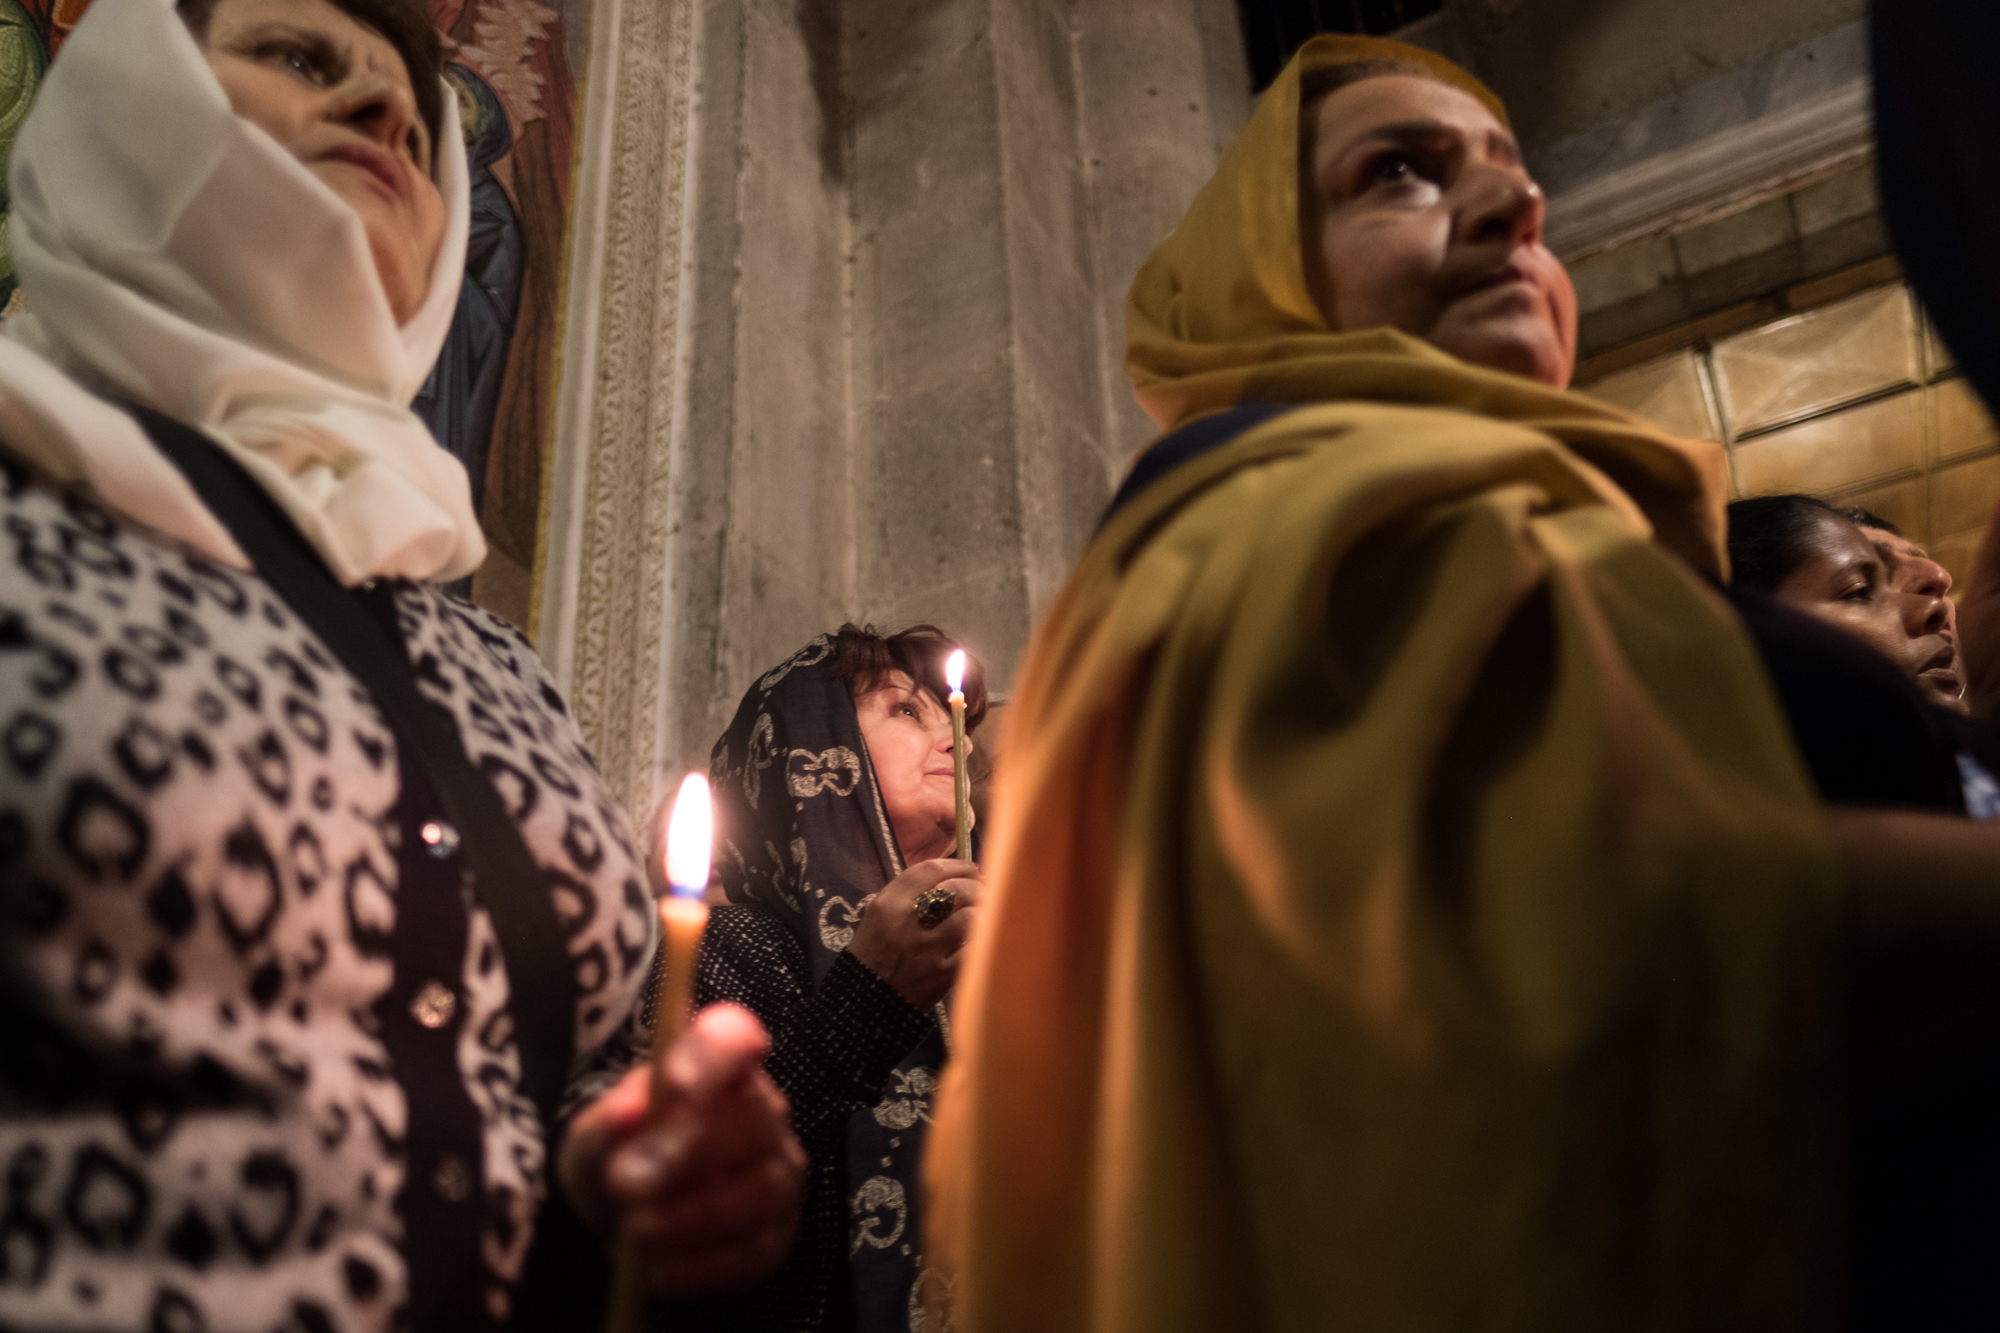 A group of women process by candlelight in an Armenian ceremony.